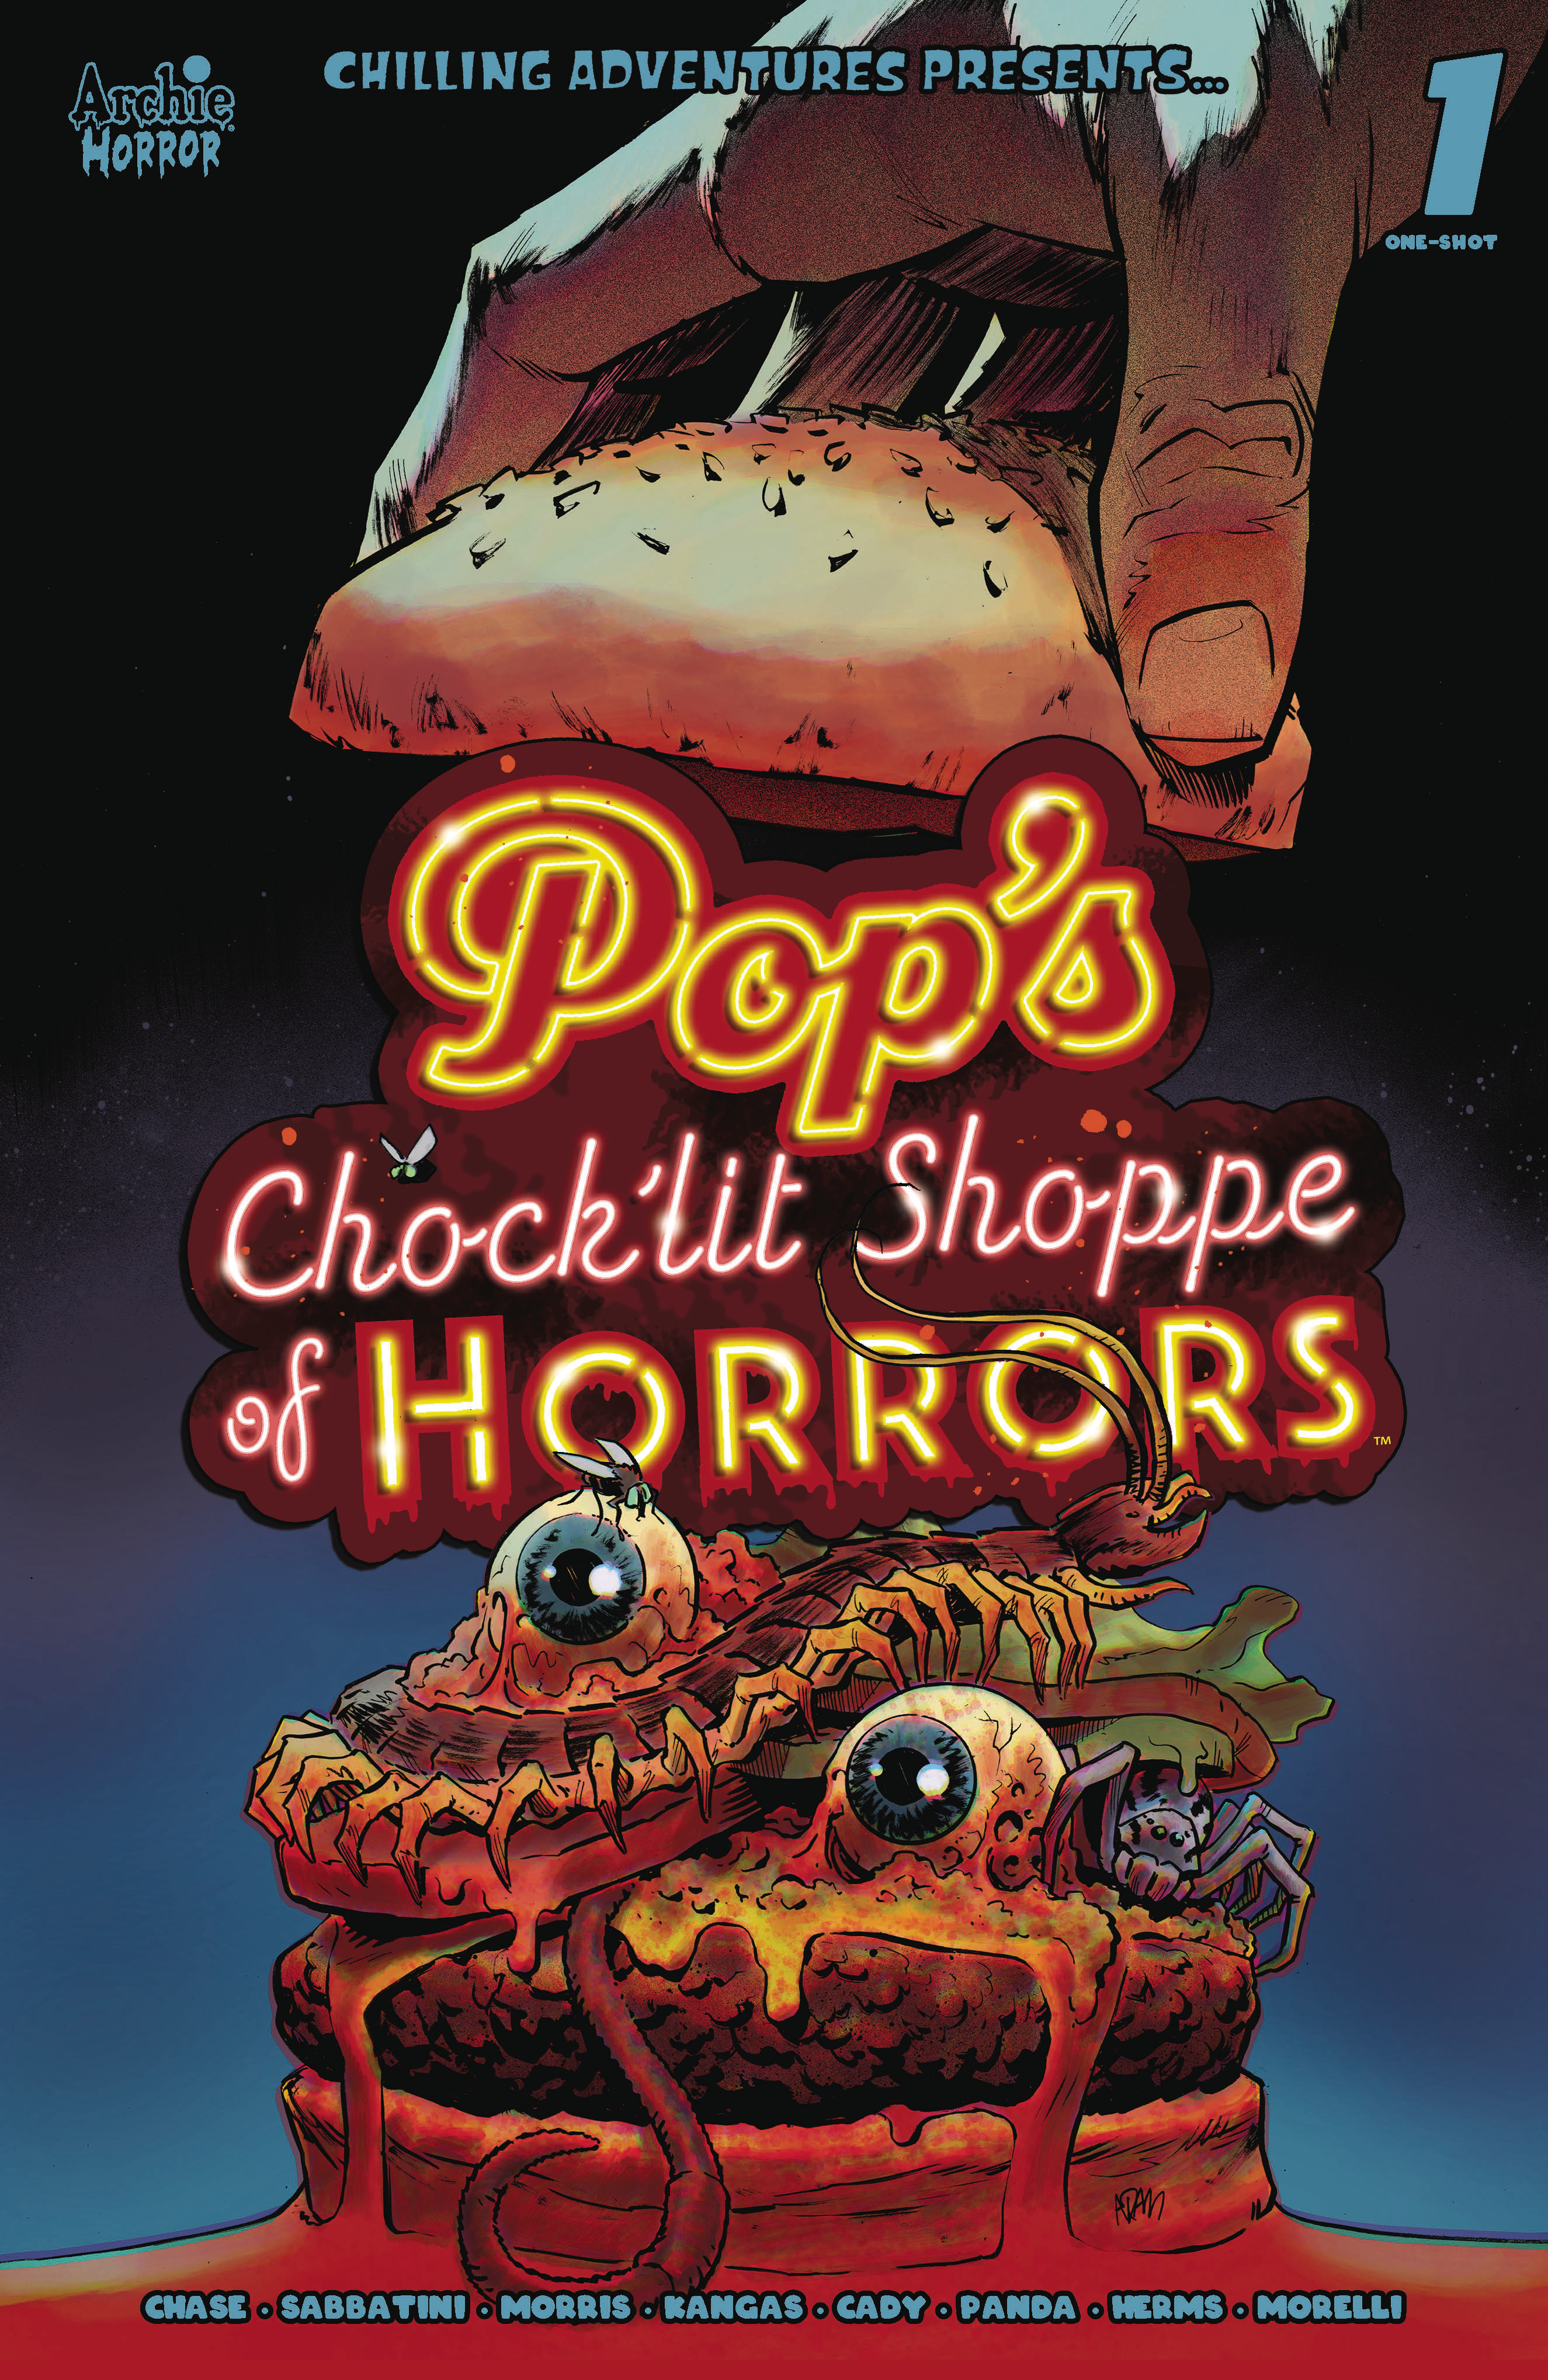 Pops Chocklit Shoppe of Horrors Oneshot Cover A Gorham